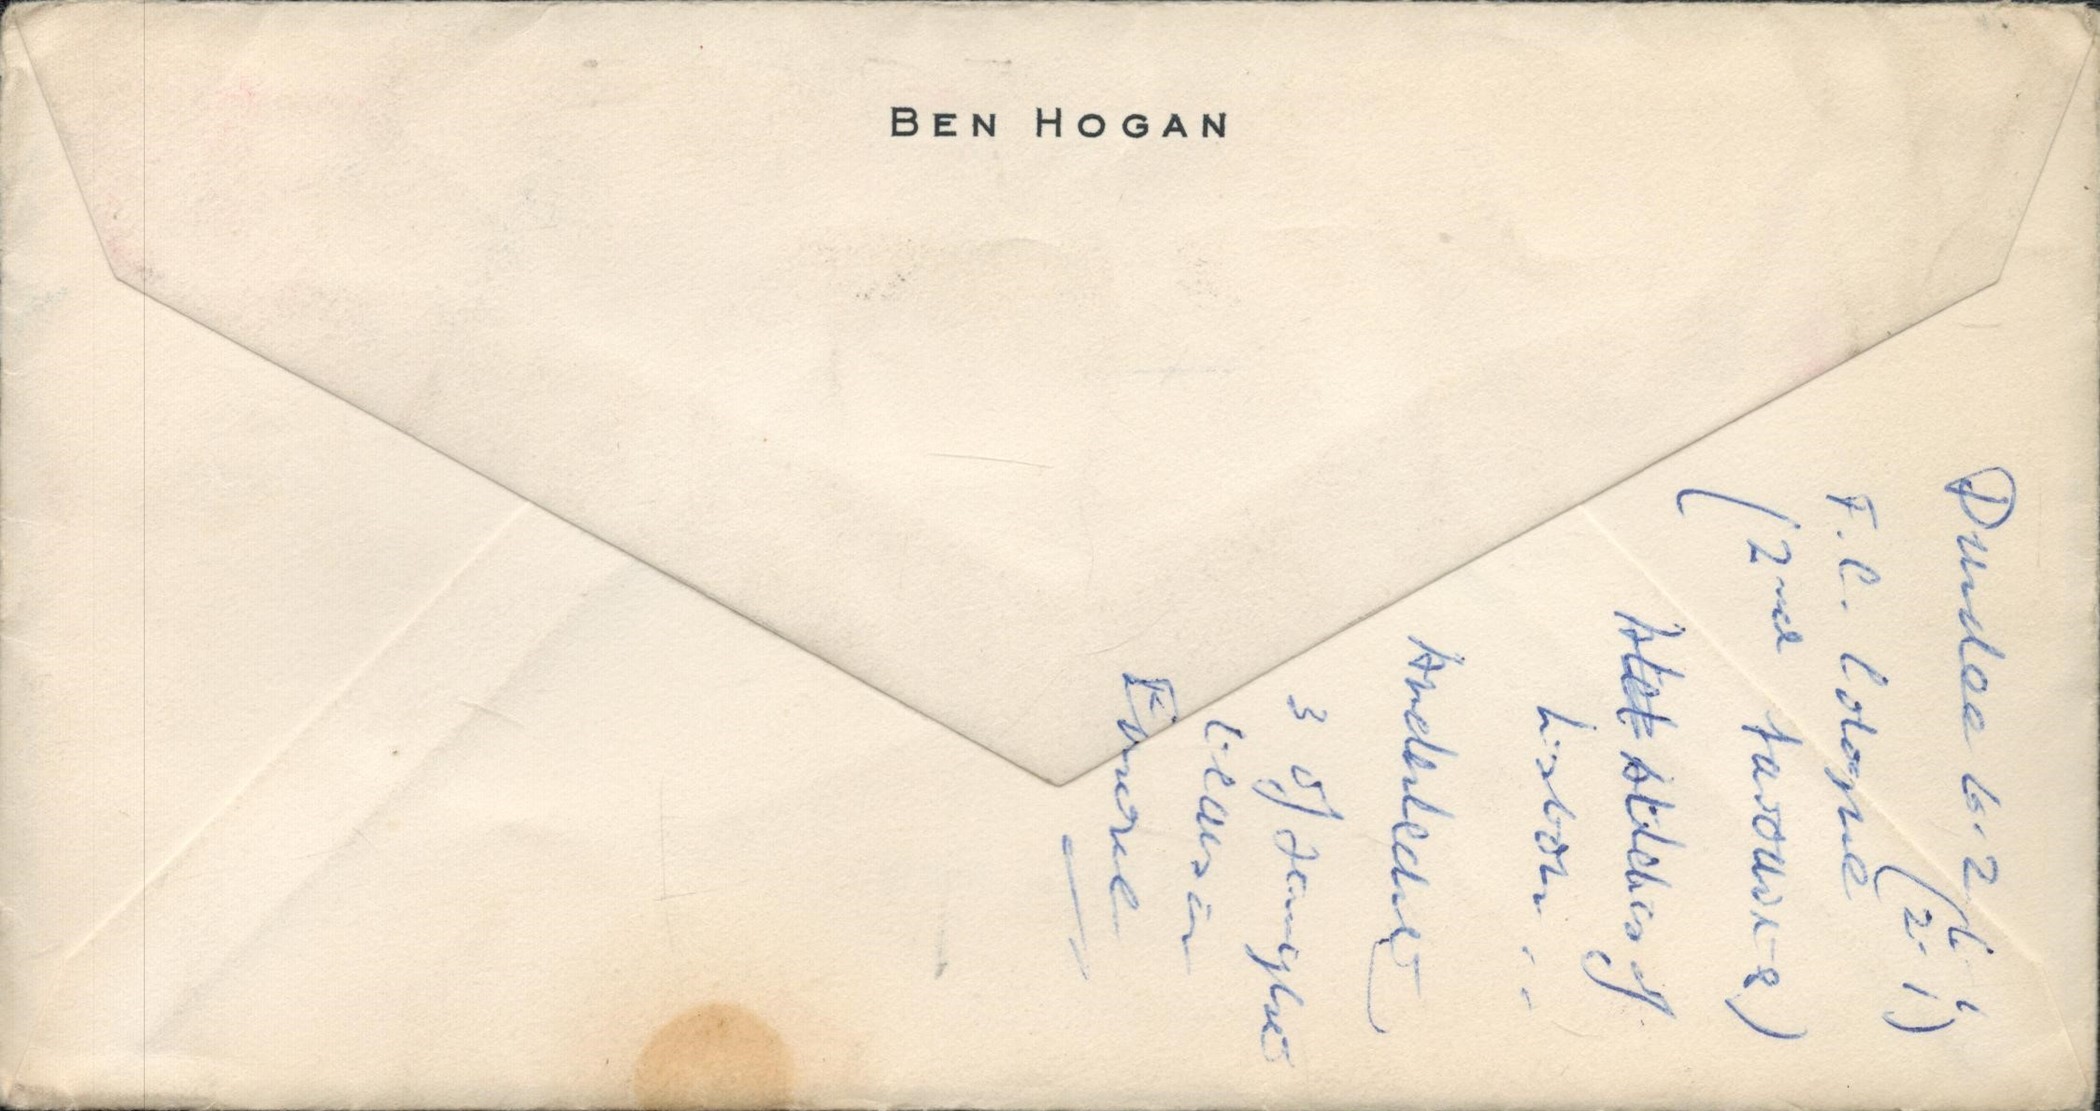 Ben Hogan TLS dated March 7, 1963, on headed note paper with original Air mail envelope - Image 2 of 2